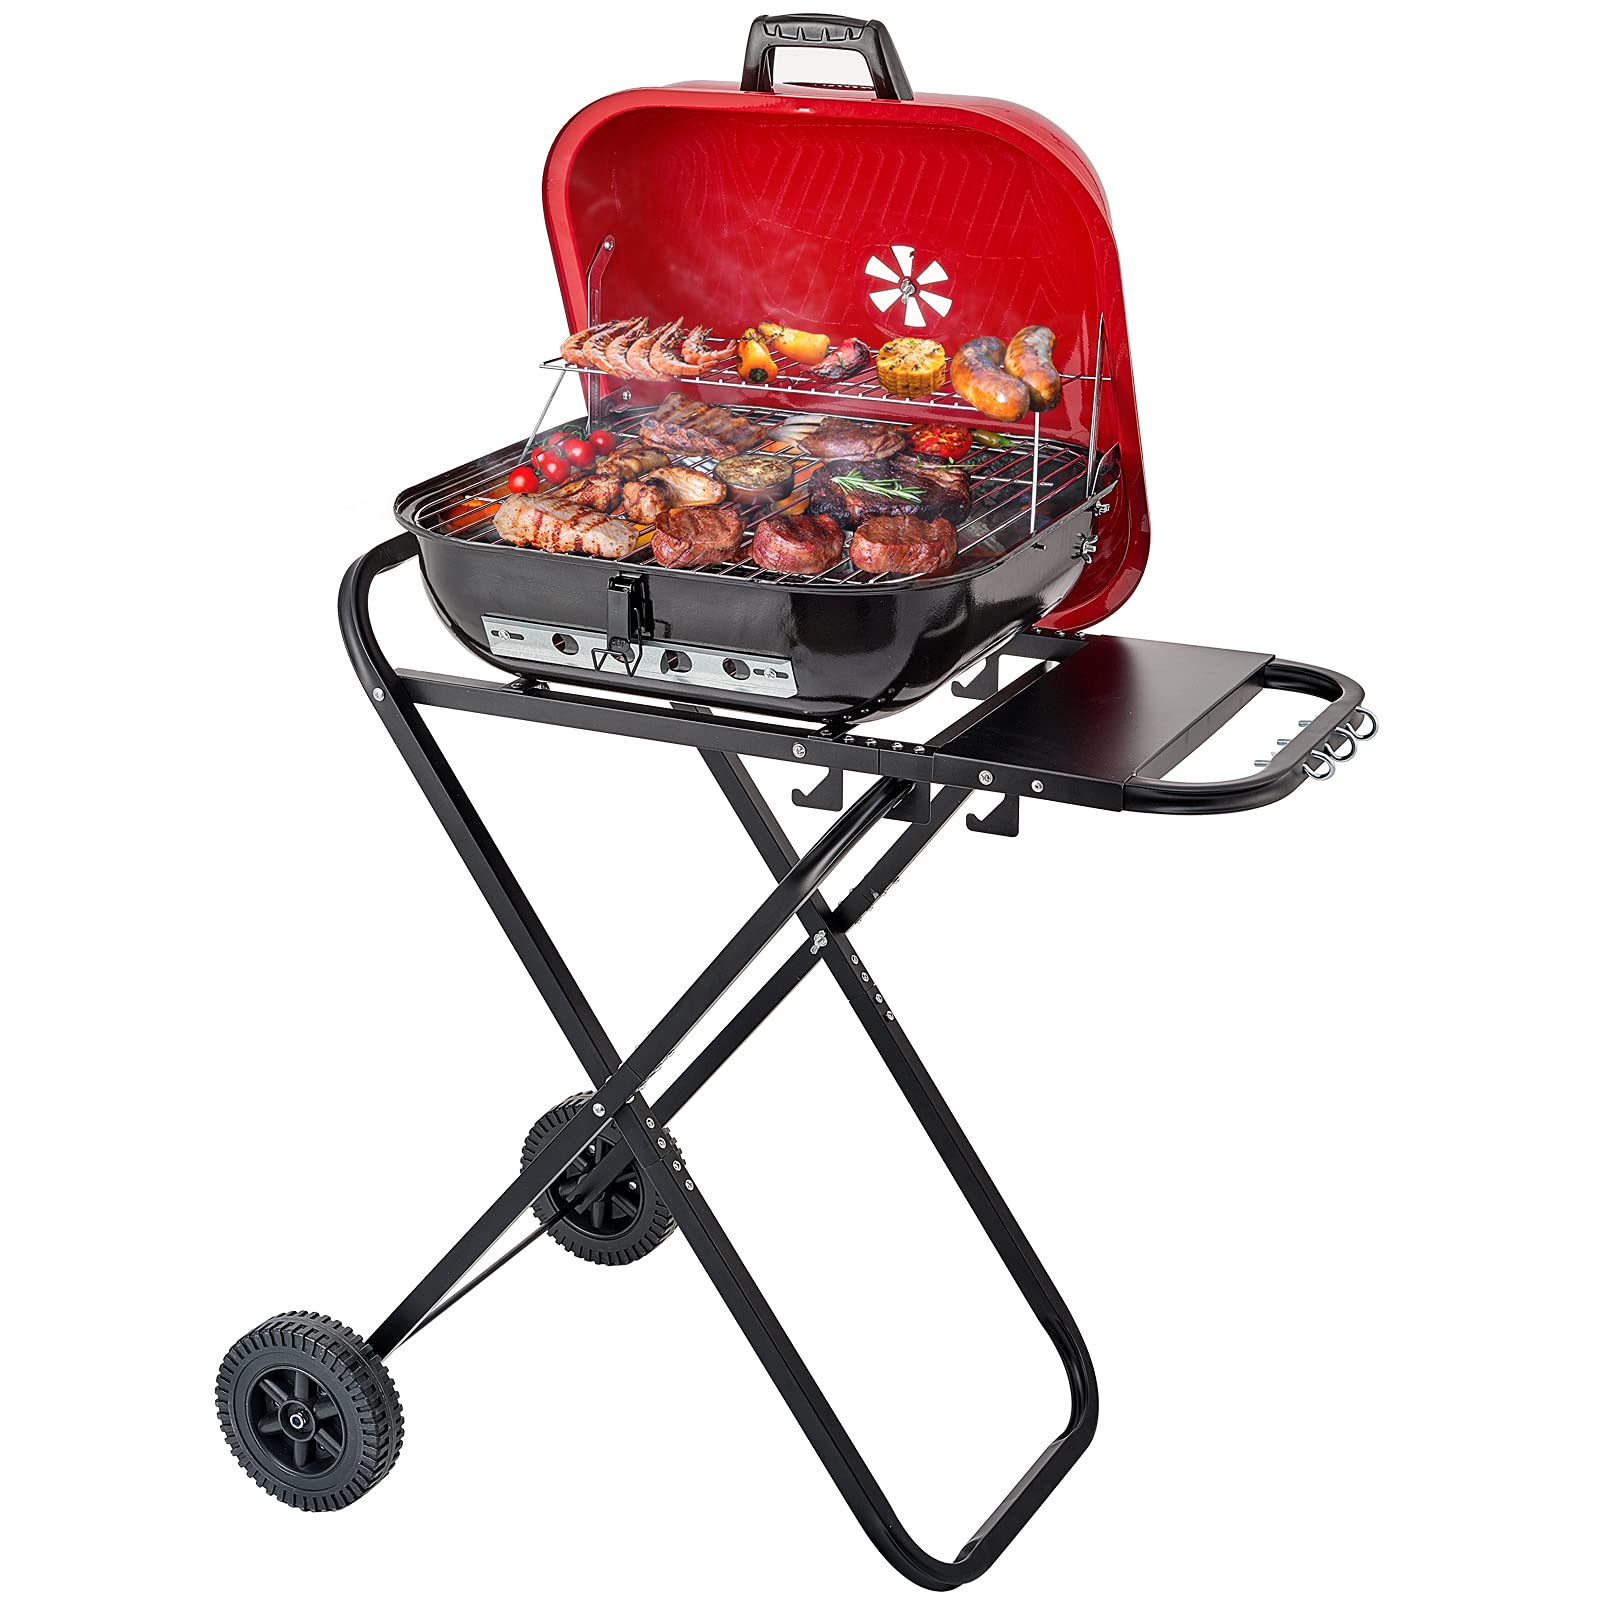 Cusimax 18.5 Inch Portable Grill Charcoal Barbecue Grill with Side Table,Outdoor Folding Camping Grill For Backyard, Patio and Parties,Easy to Carry&Move